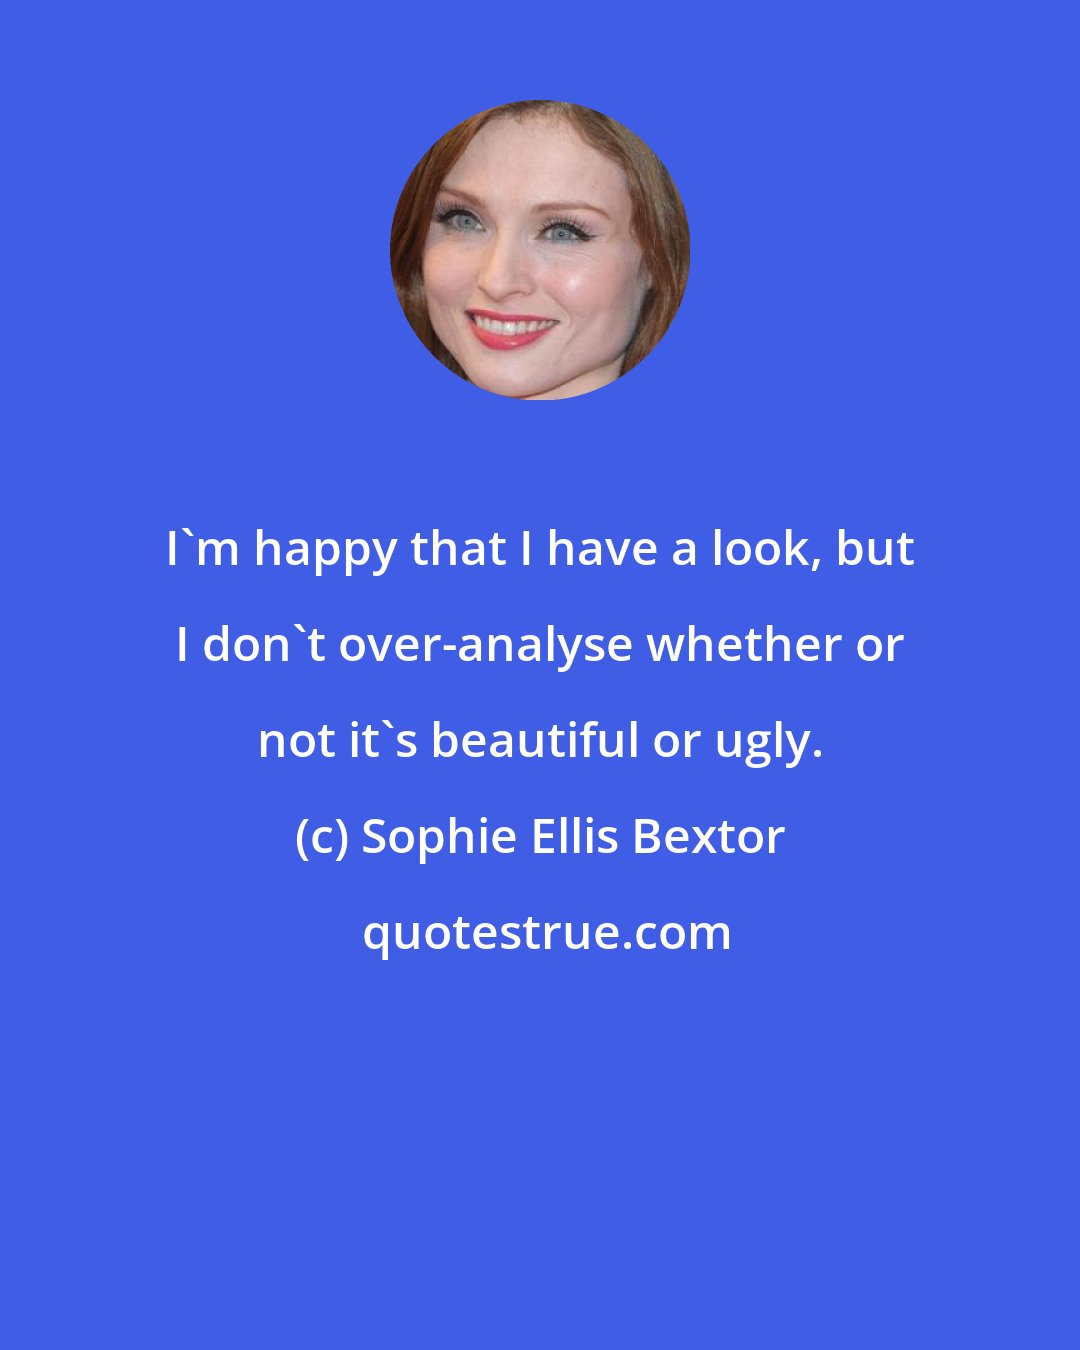 Sophie Ellis Bextor: I'm happy that I have a look, but I don't over-analyse whether or not it's beautiful or ugly.